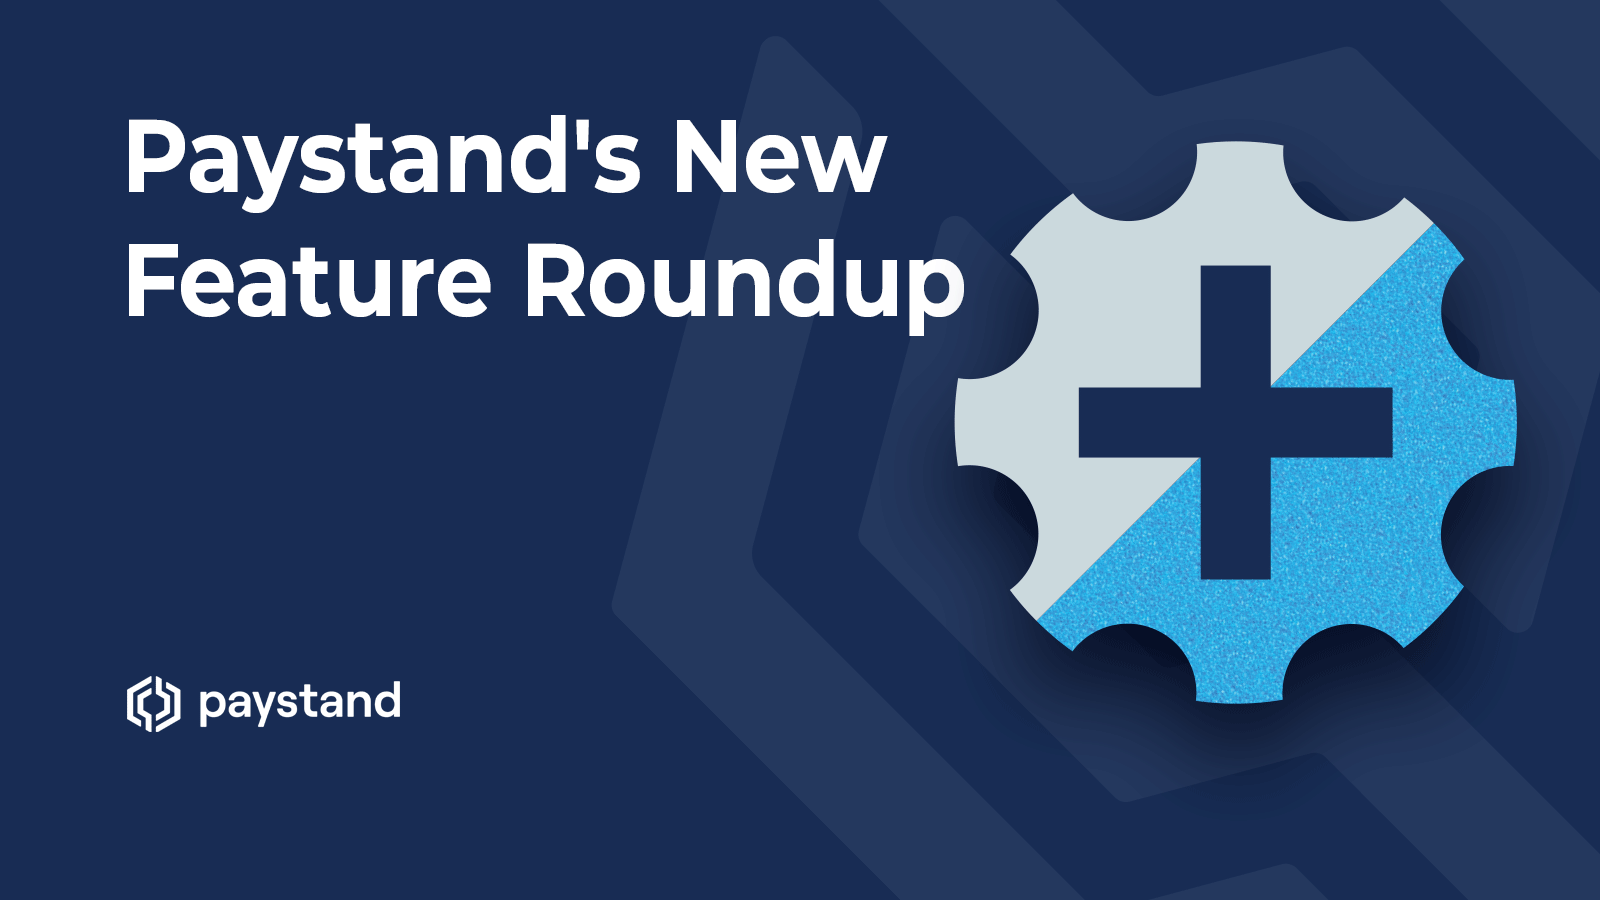 Paystand’s 2022 New Feature Roundup